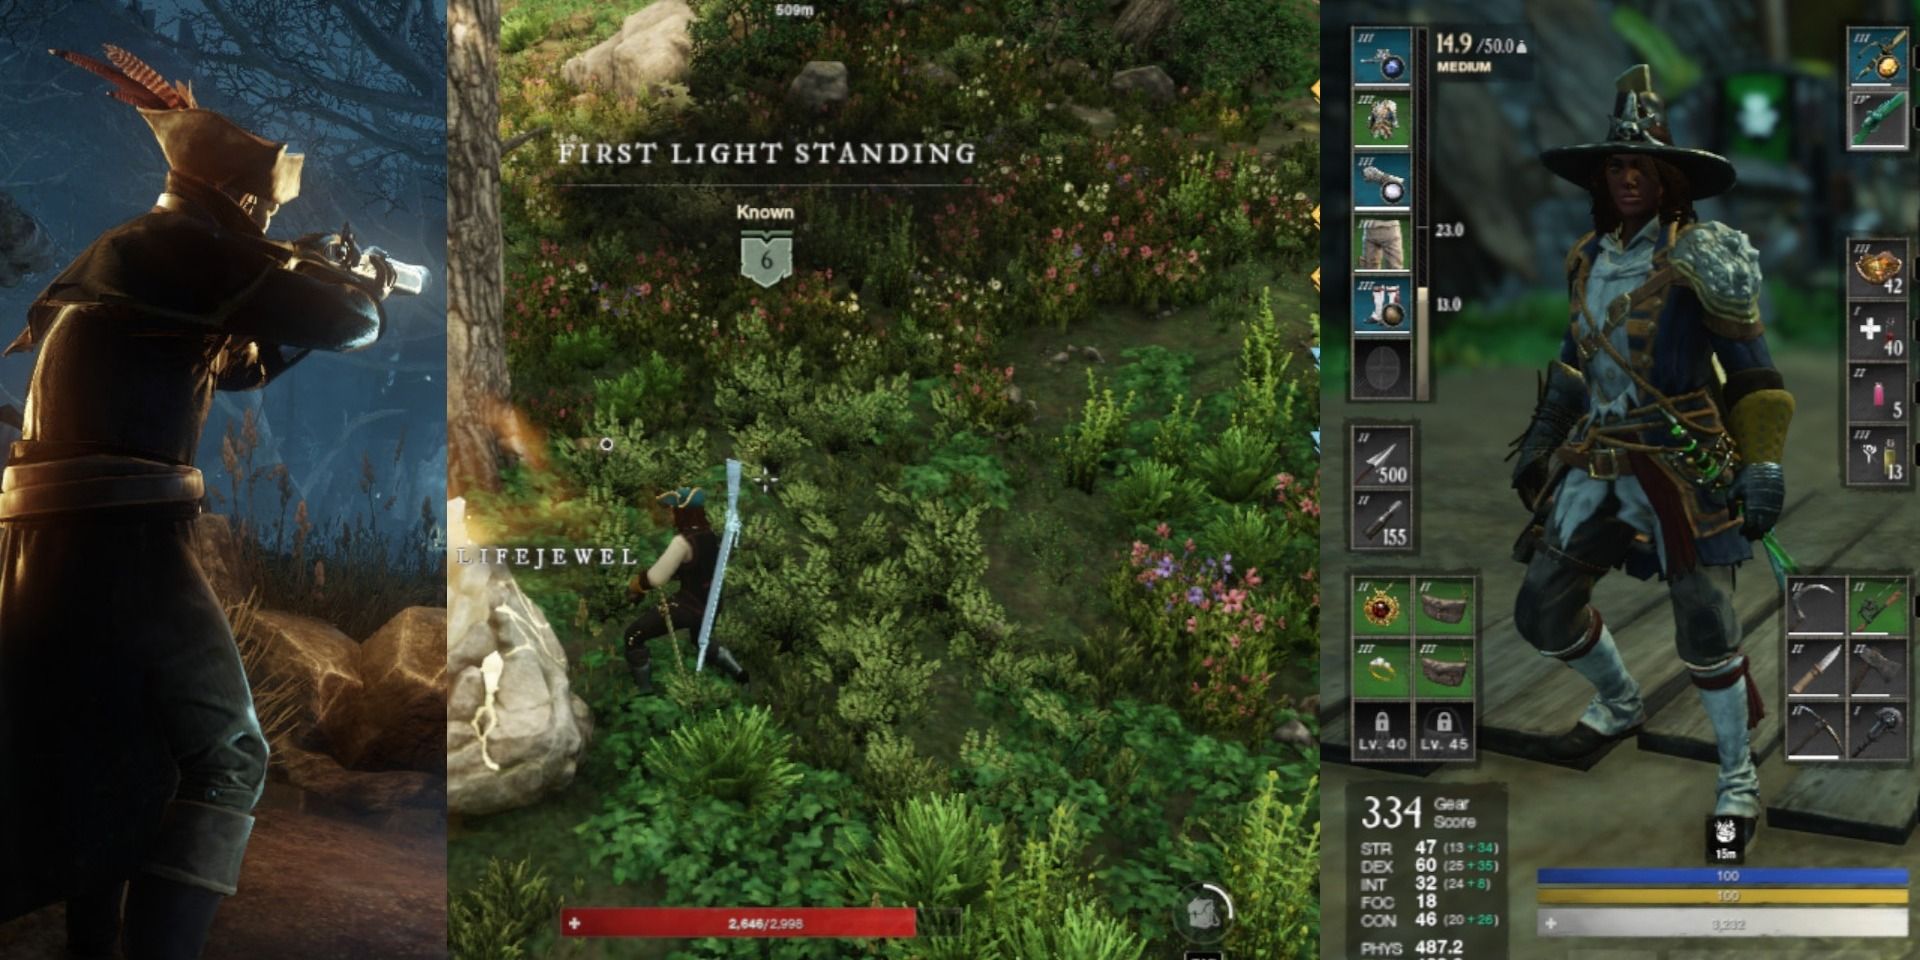 The  Games studio behind 'New World' levels up its MMO